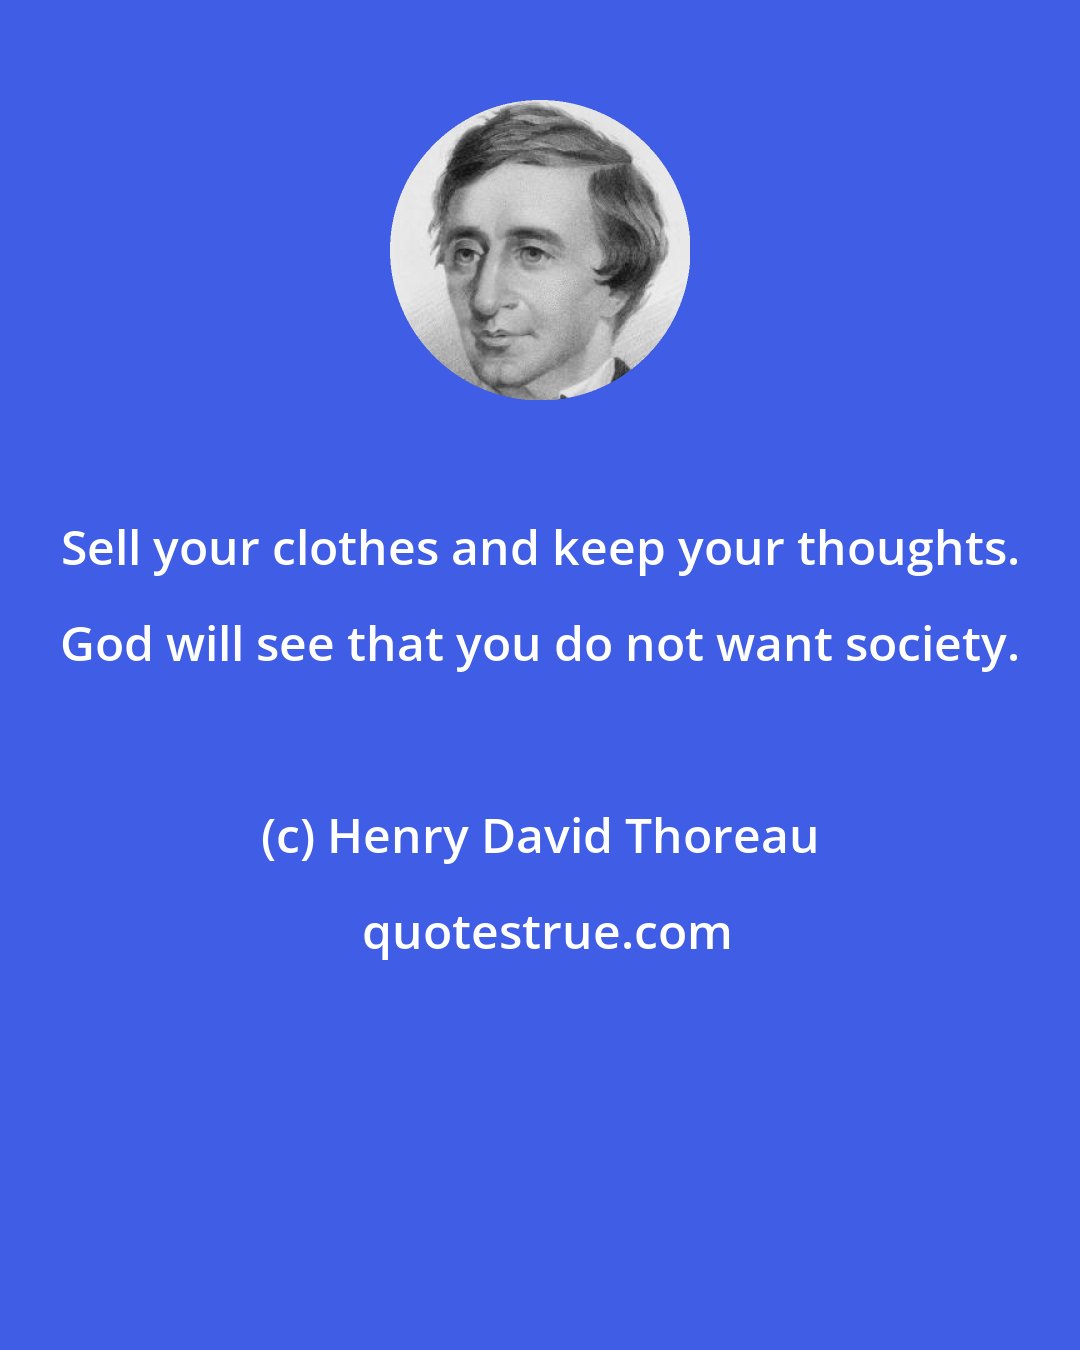 Henry David Thoreau: Sell your clothes and keep your thoughts. God will see that you do not want society.